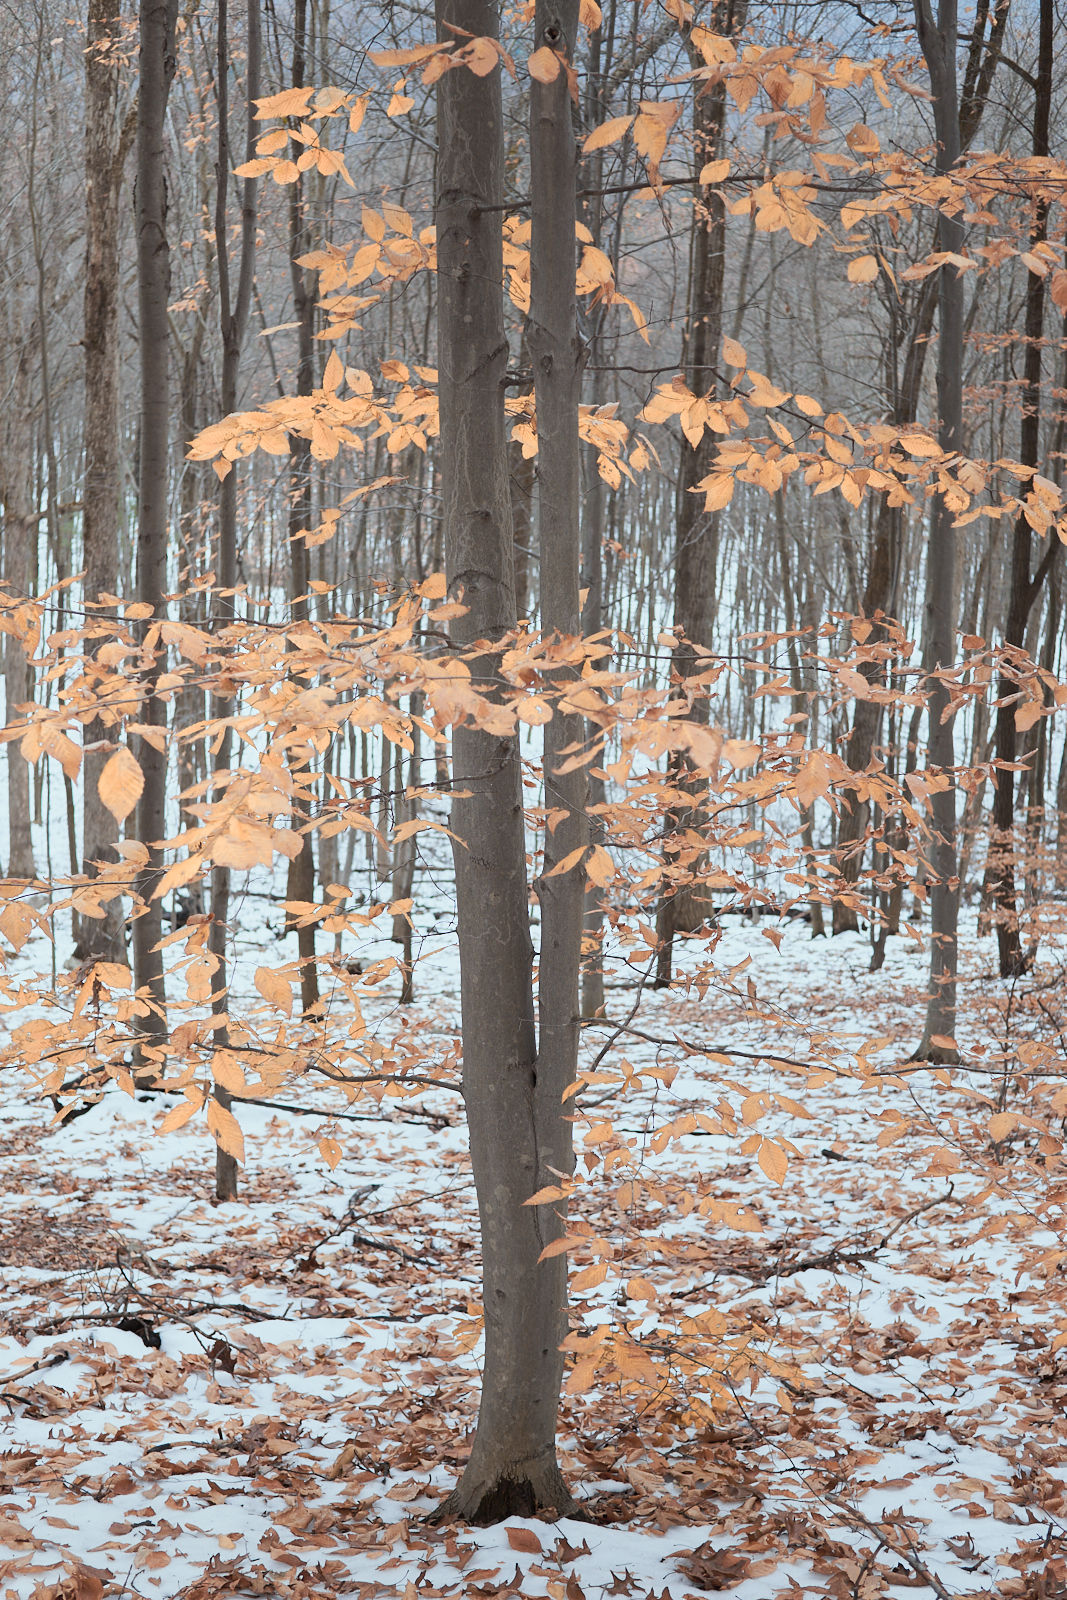 Beech Tree in a Snow Covered Forest - fine art nature photography - Pennsylvania